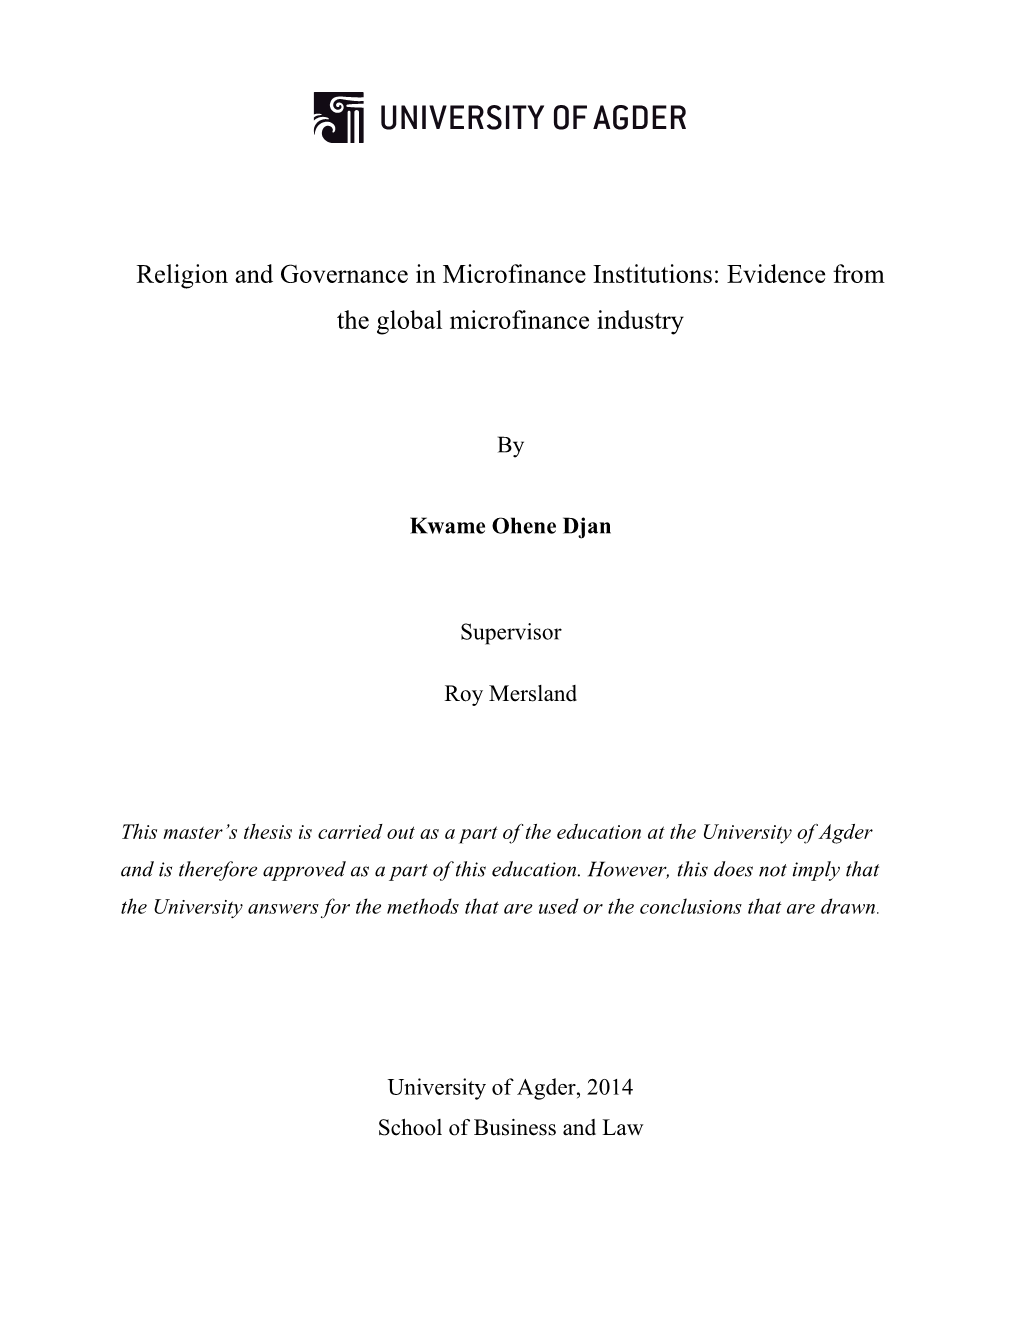 Religion and Governance in Microfinance Institutions: Evidence from the Global Microfinance Industry